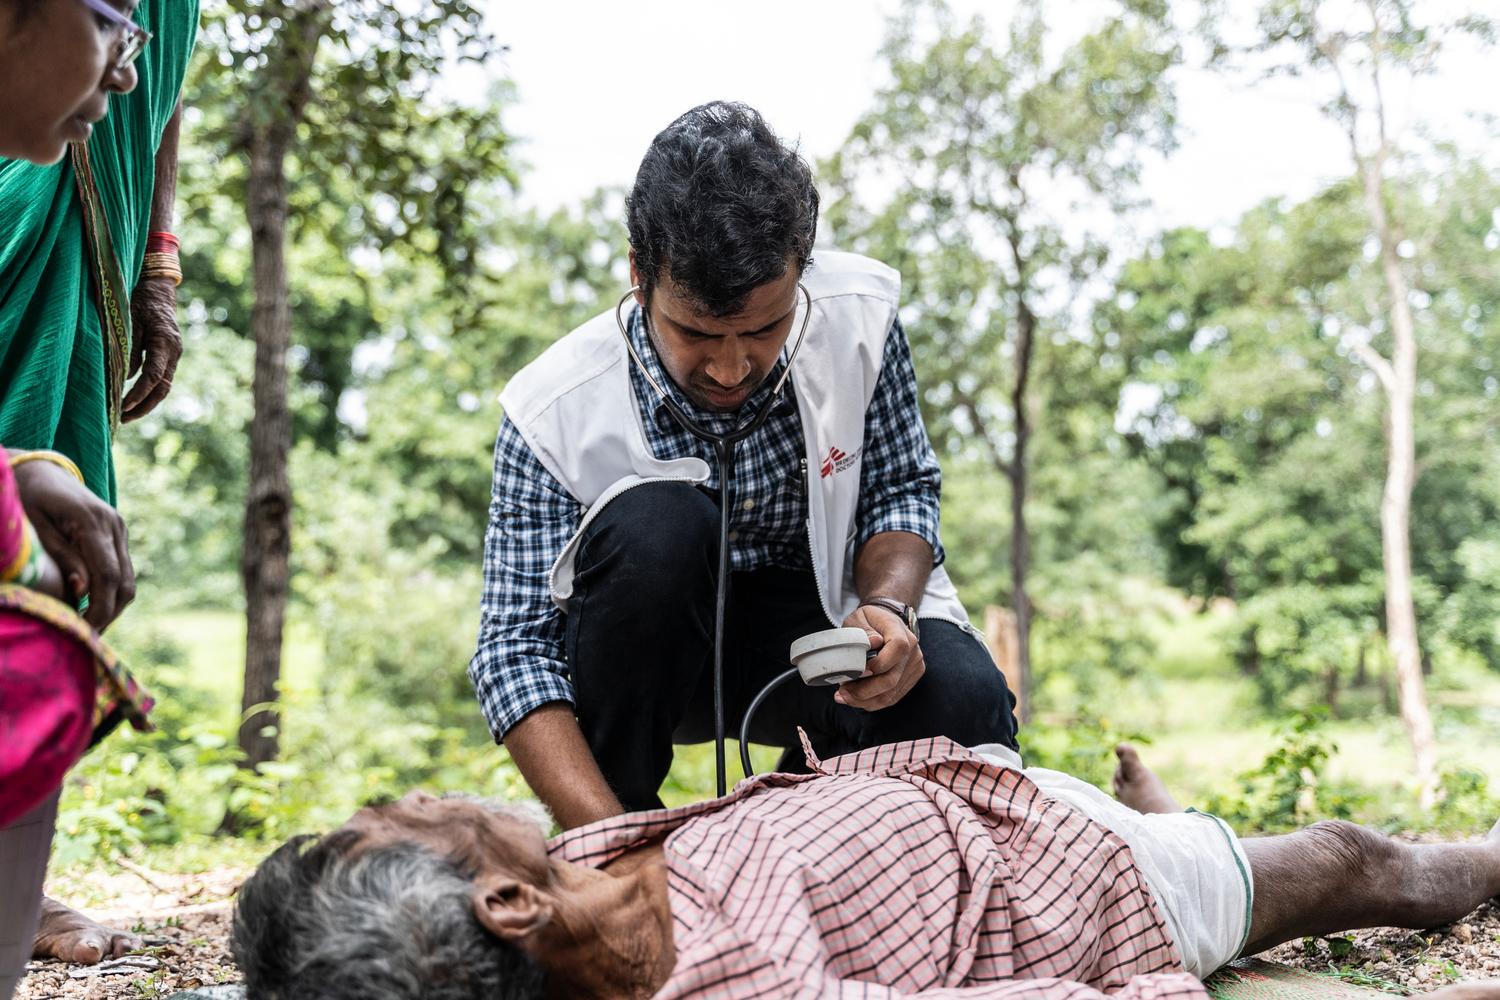 In southern Chhattisgarh, where MSF runs mobile clinics, a doctor attends to a patient who arrived in a critical condition. India, October 2019. 